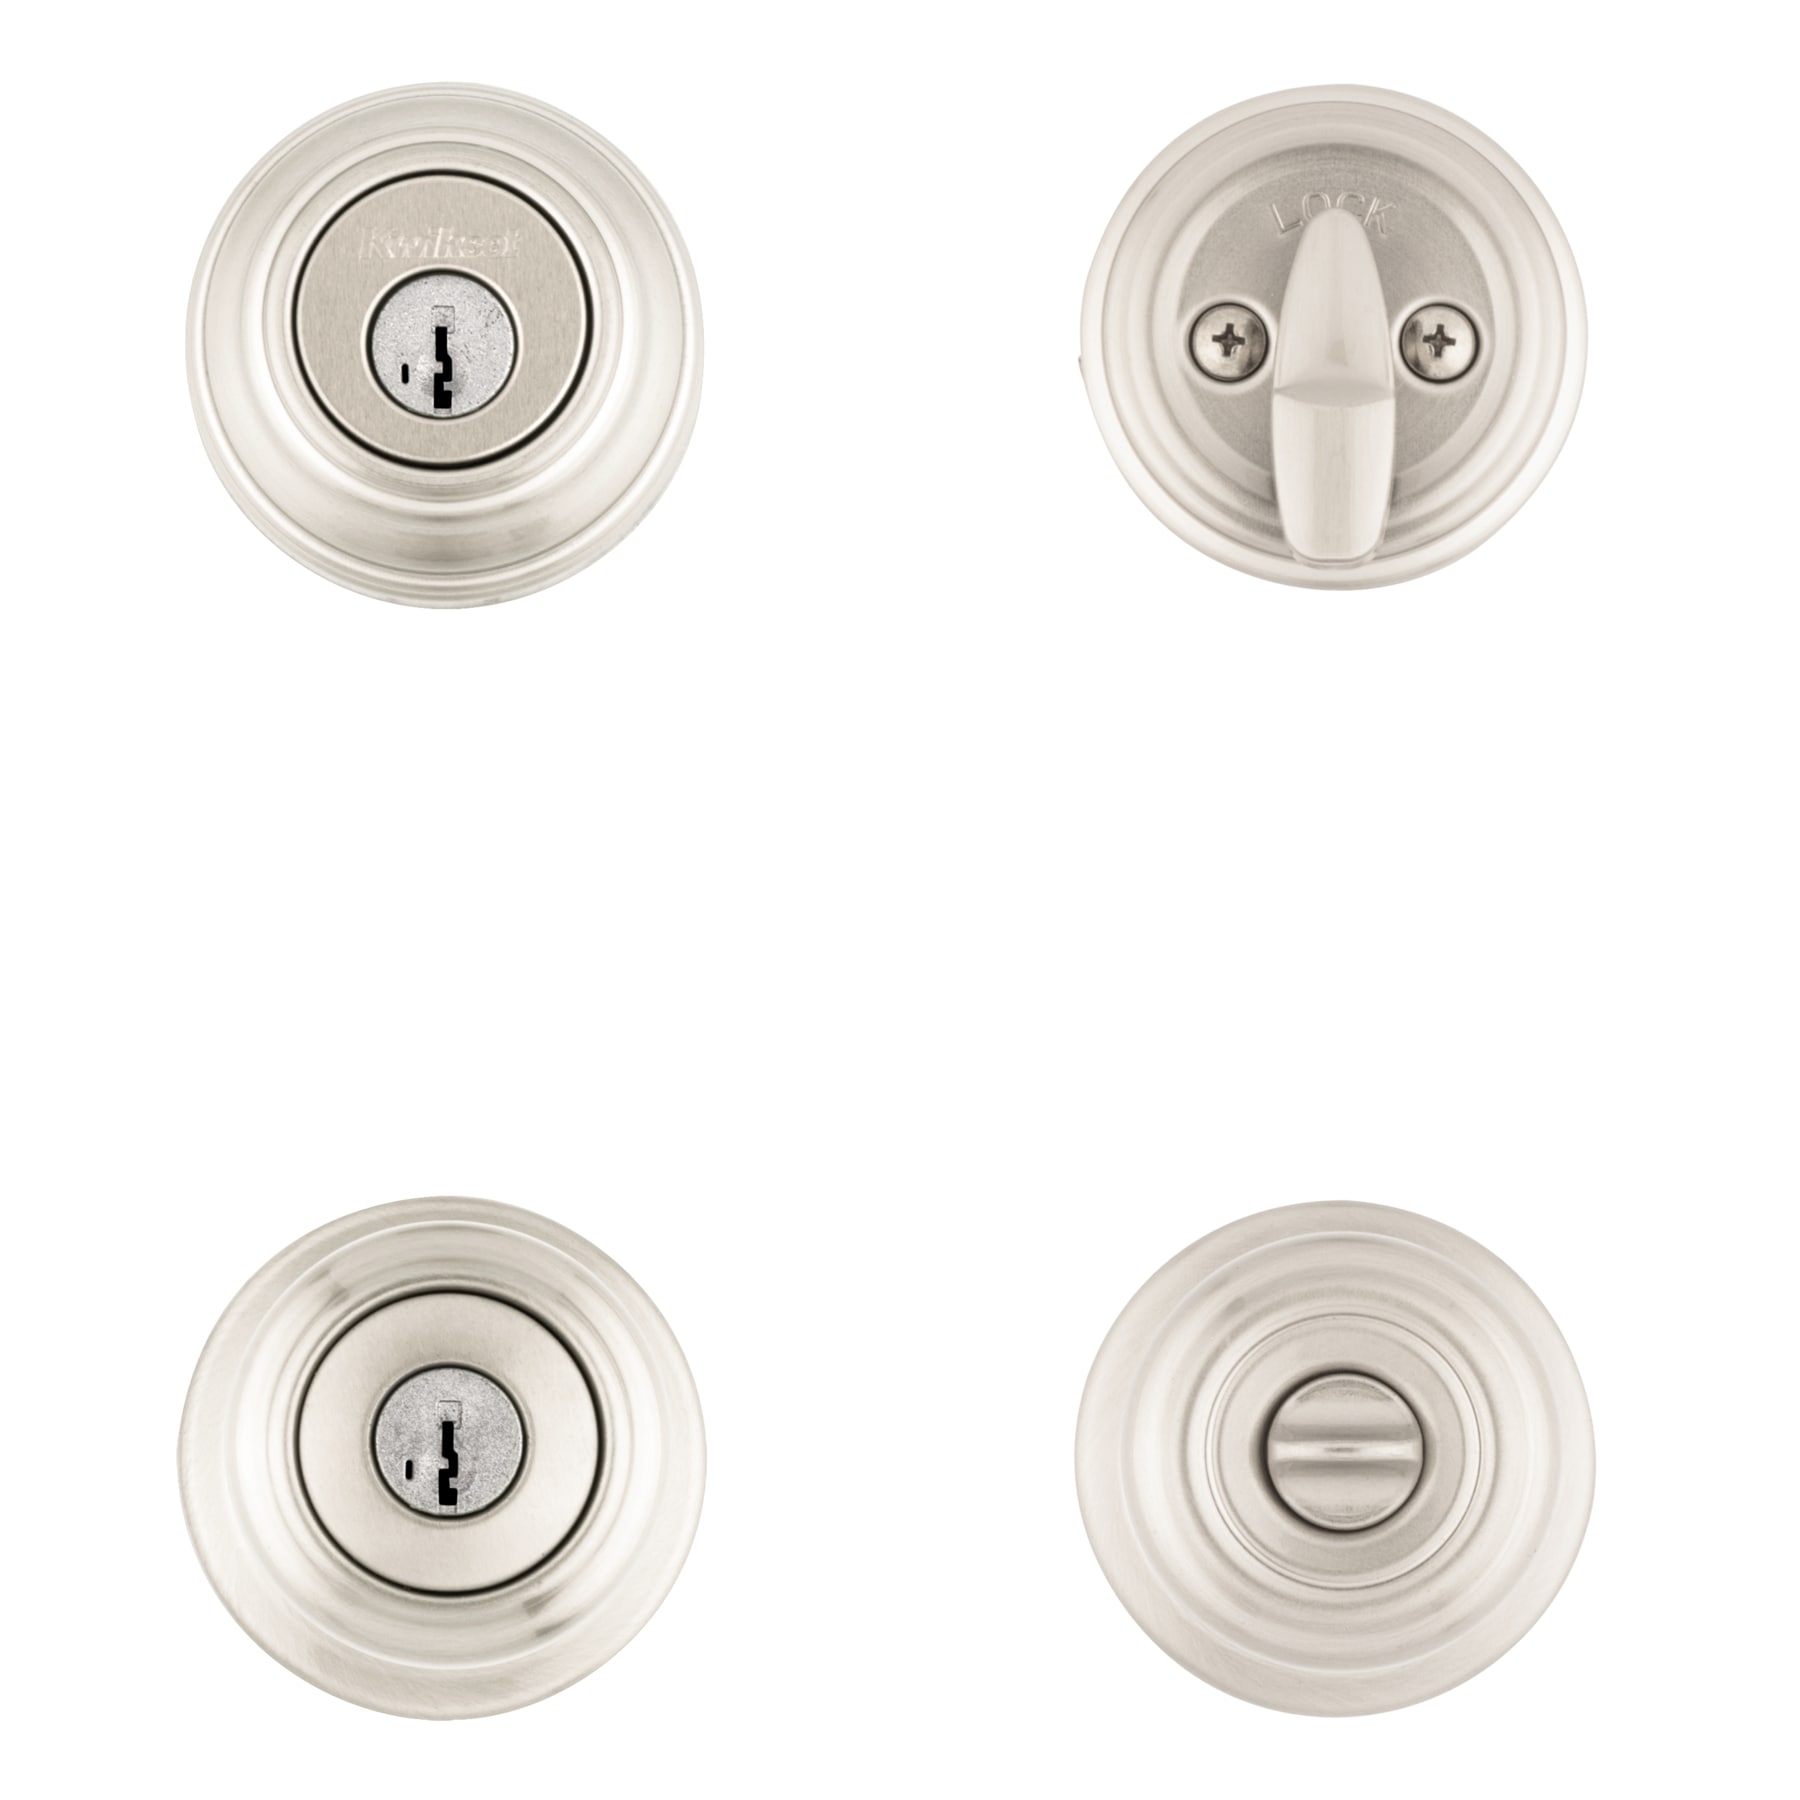 Kwikset 991 Juno Entry Knob and Single Cylinder Deadbolt Combo Pack featuri - 2